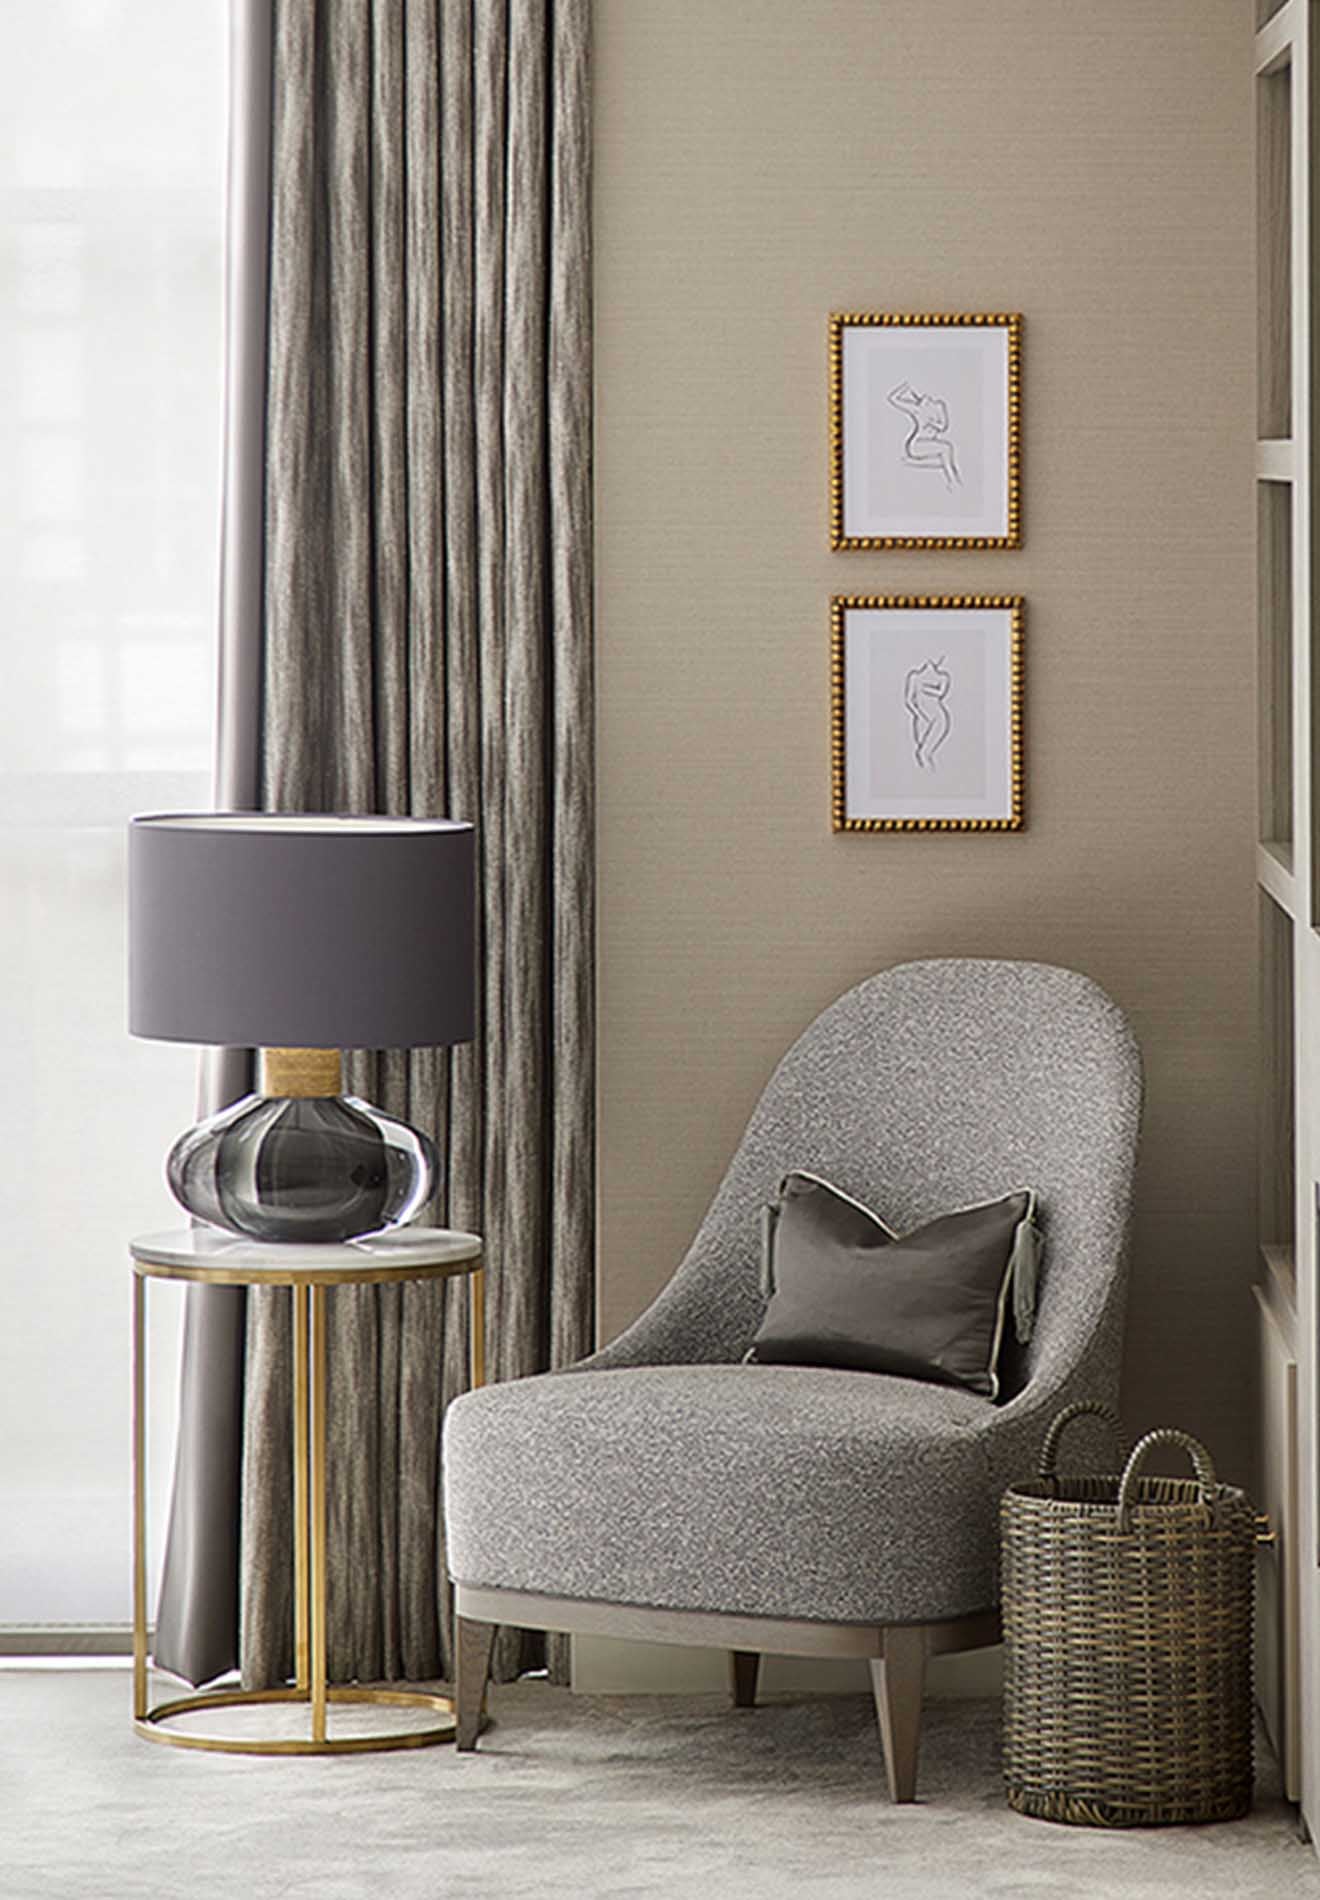 Porta Romana Cologne Lamp in Charcoal featured inSixty 3 London's Interior, photography by Julian Abrams